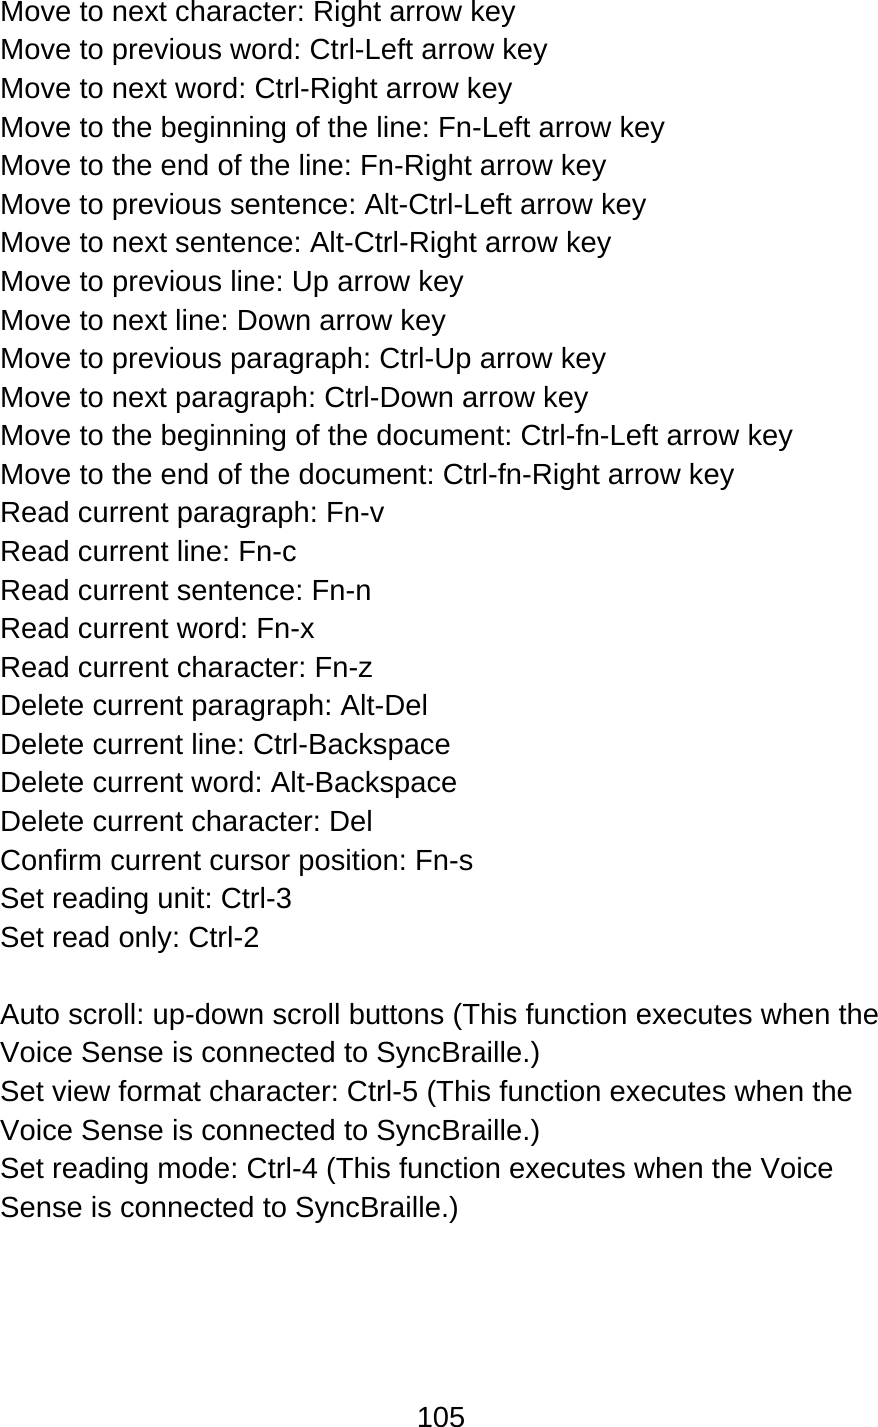 105  Move to next character: Right arrow key Move to previous word: Ctrl-Left arrow key Move to next word: Ctrl-Right arrow key Move to the beginning of the line: Fn-Left arrow key Move to the end of the line: Fn-Right arrow key Move to previous sentence: Alt-Ctrl-Left arrow key Move to next sentence: Alt-Ctrl-Right arrow key Move to previous line: Up arrow key Move to next line: Down arrow key Move to previous paragraph: Ctrl-Up arrow key   Move to next paragraph: Ctrl-Down arrow key Move to the beginning of the document: Ctrl-fn-Left arrow key Move to the end of the document: Ctrl-fn-Right arrow key Read current paragraph: Fn-v Read current line: Fn-c Read current sentence: Fn-n Read current word: Fn-x Read current character: Fn-z Delete current paragraph: Alt-Del Delete current line: Ctrl-Backspace Delete current word: Alt-Backspace Delete current character: Del Confirm current cursor position: Fn-s Set reading unit: Ctrl-3 Set read only: Ctrl-2  Auto scroll: up-down scroll buttons (This function executes when the Voice Sense is connected to SyncBraille.) Set view format character: Ctrl-5 (This function executes when the Voice Sense is connected to SyncBraille.) Set reading mode: Ctrl-4 (This function executes when the Voice Sense is connected to SyncBraille.) 